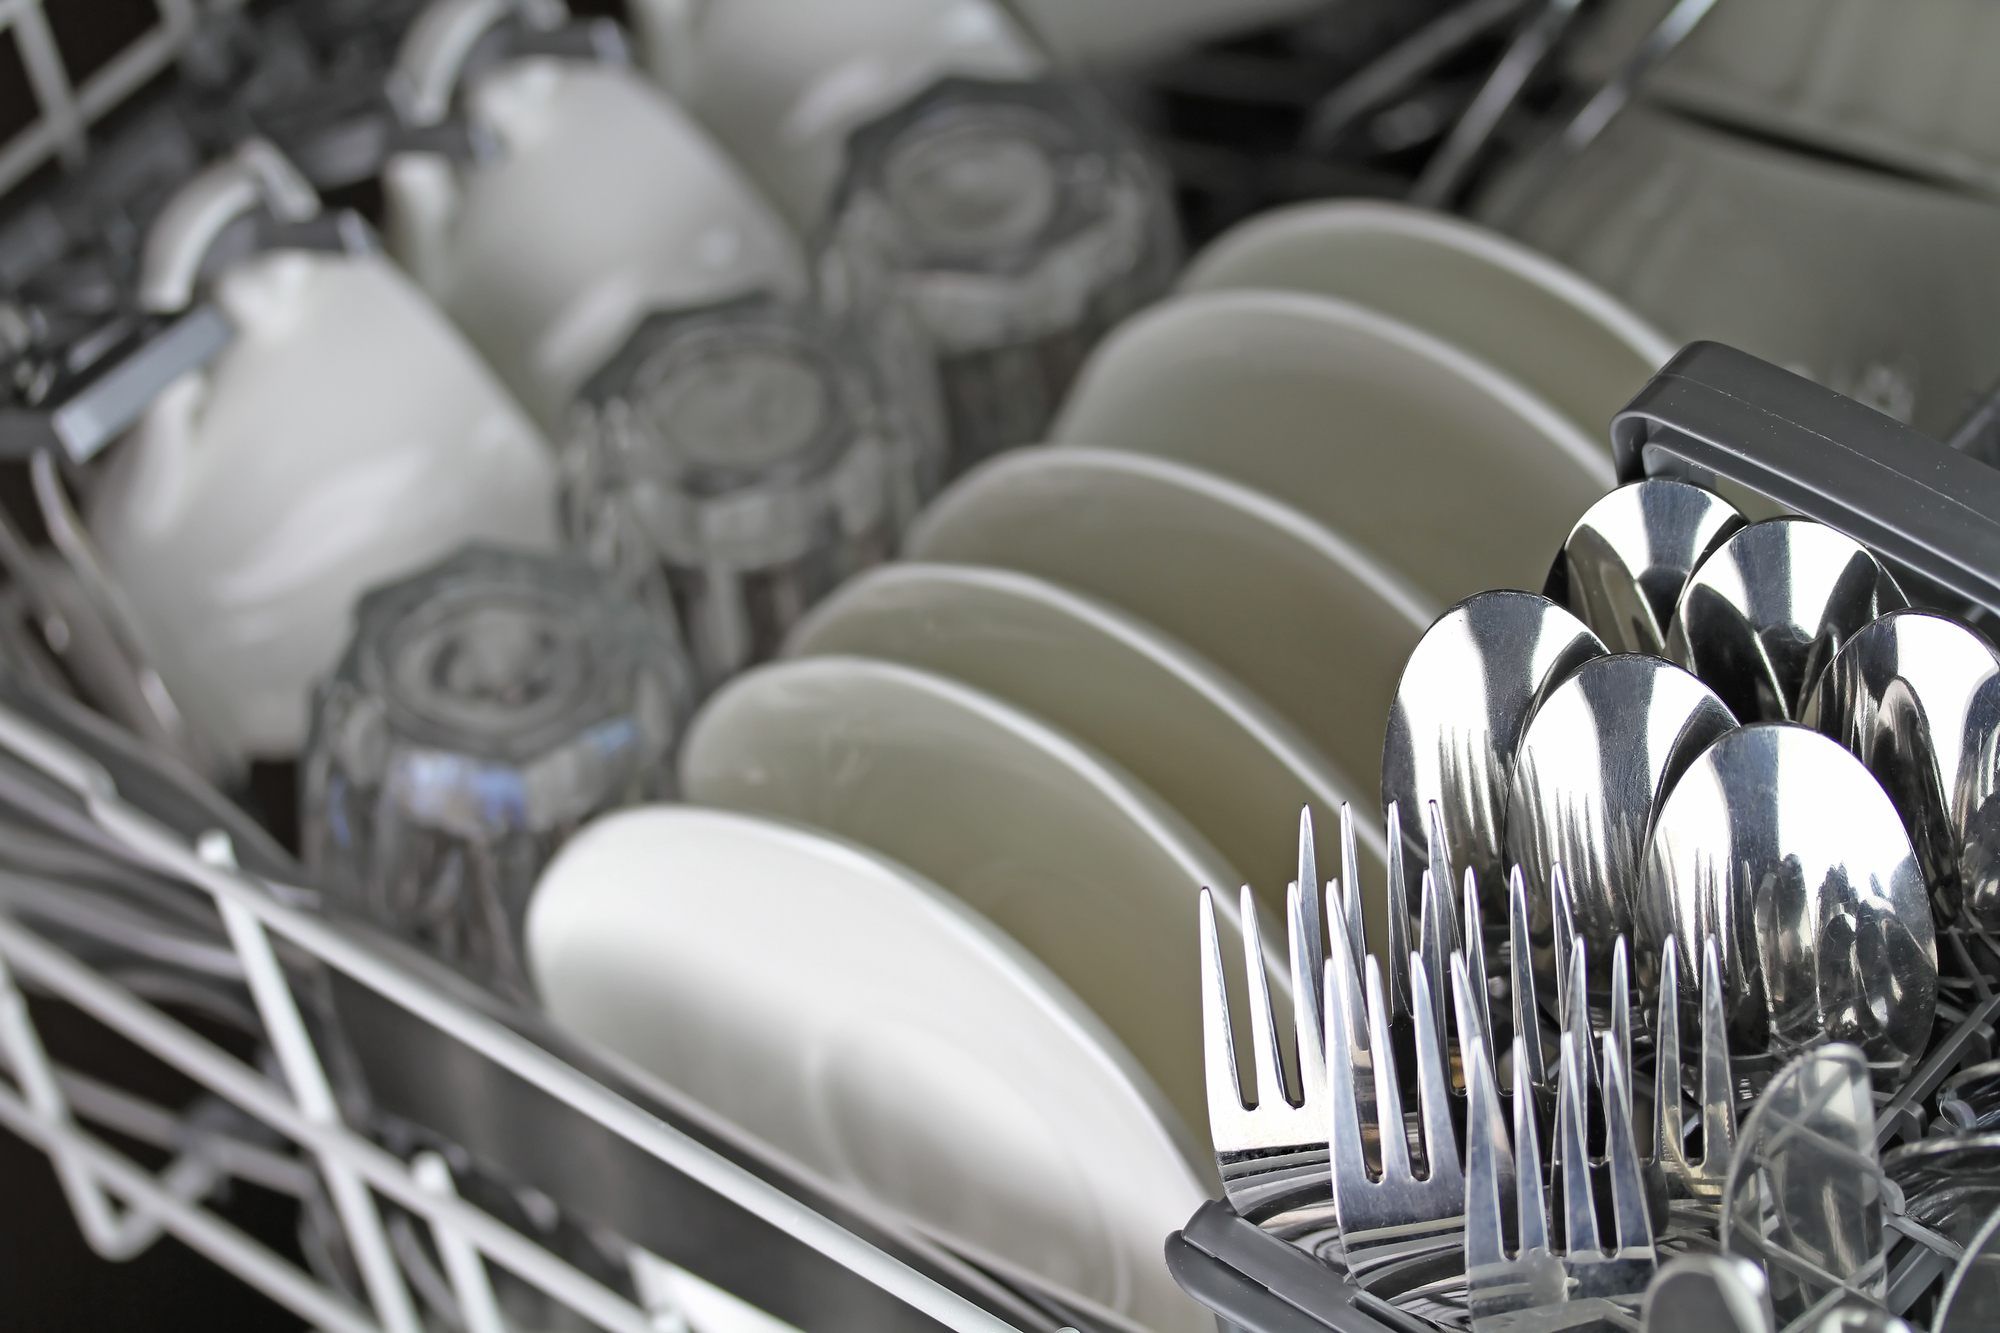 https://s40123.pcdn.co/wp-content/uploads/2020/09/clean-dishes-in-dishwasher.jpg.optimal.jpg